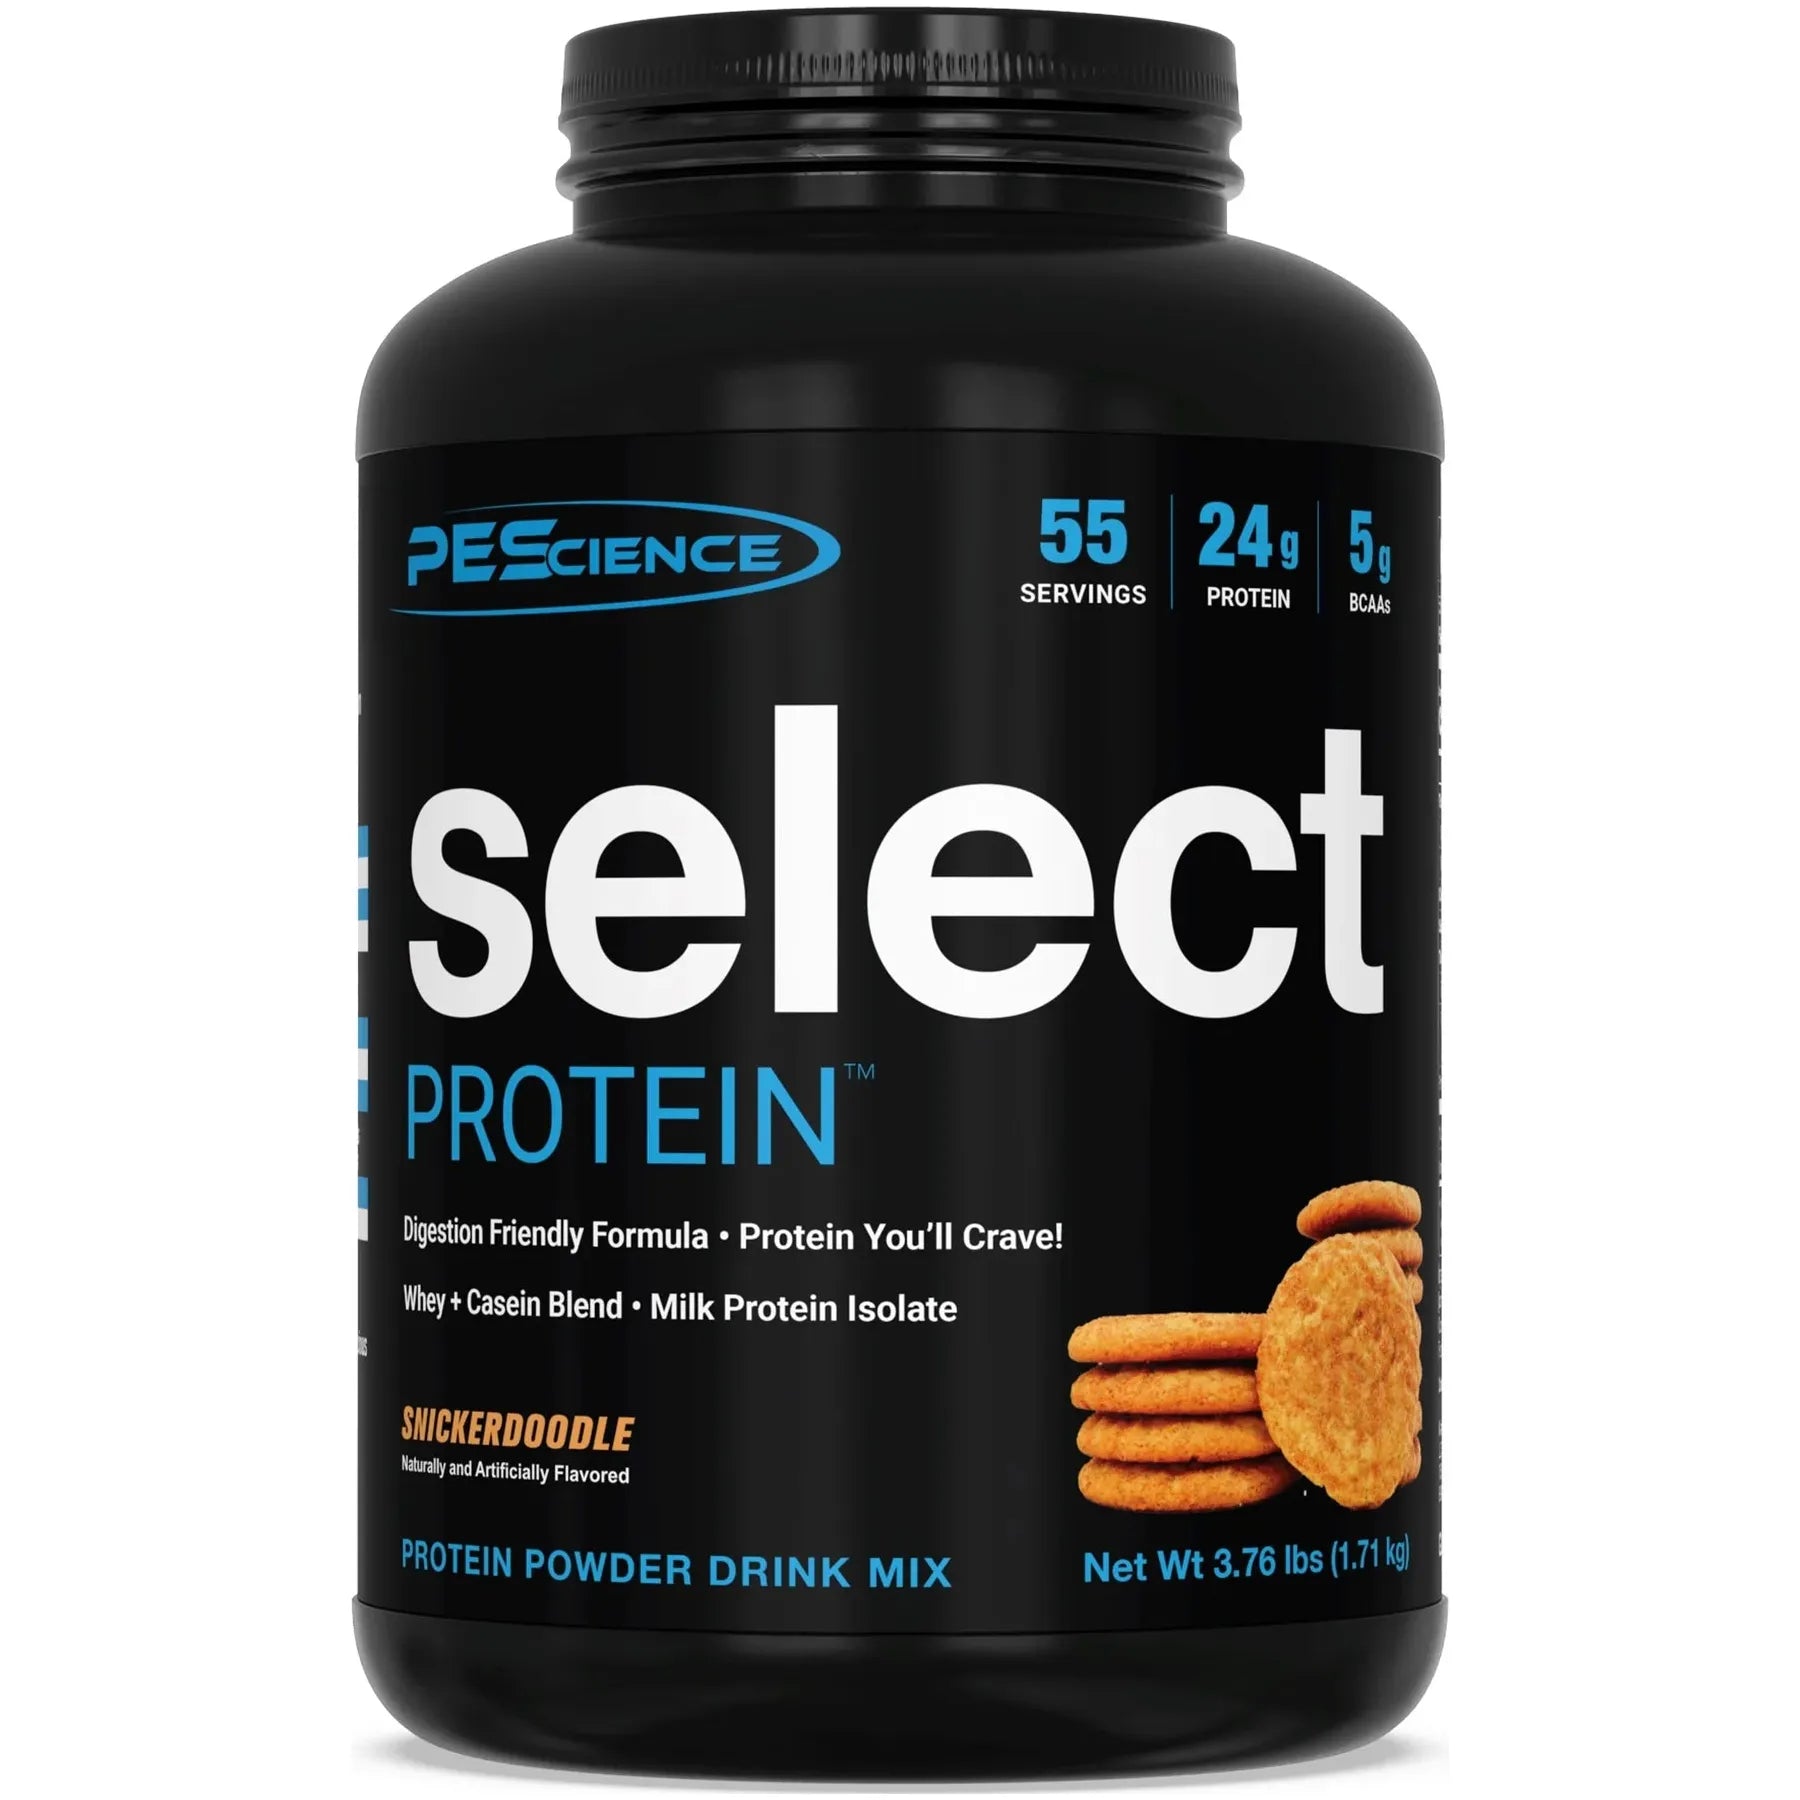 PEScience Select Protein (55 servings)  Top Nutrition and Fitness  PEScience Canada.